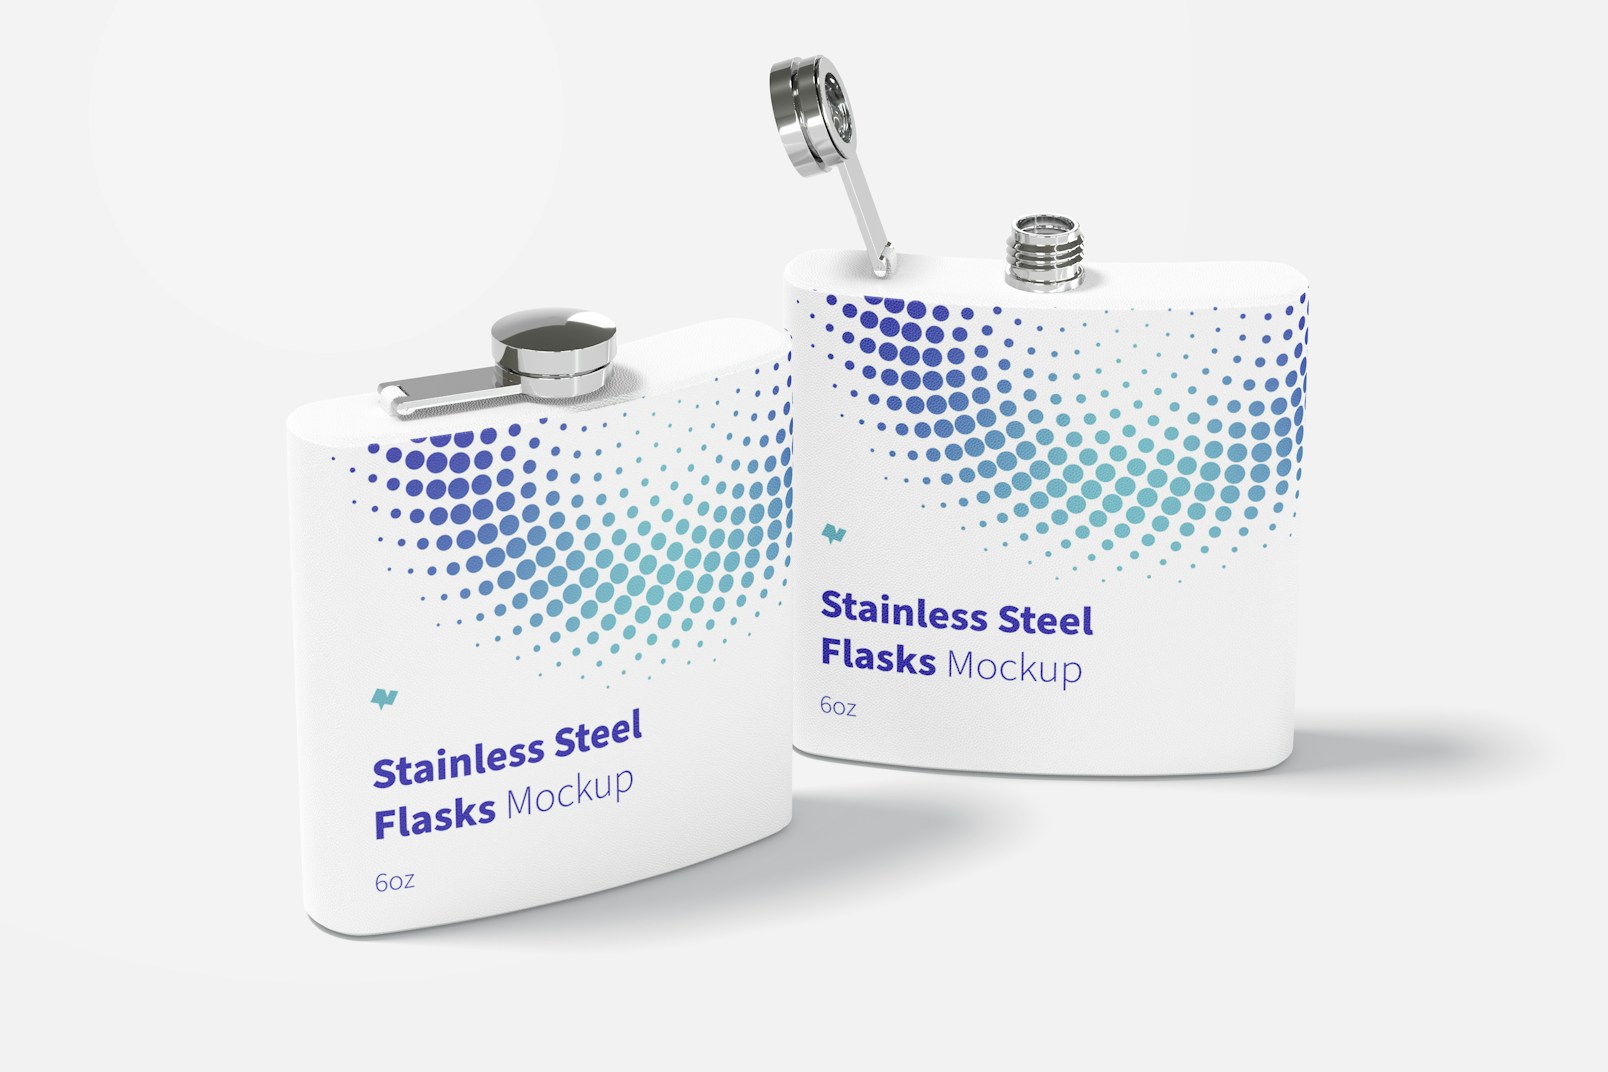 Powder Coated Stainless Steel Flasks Mockup